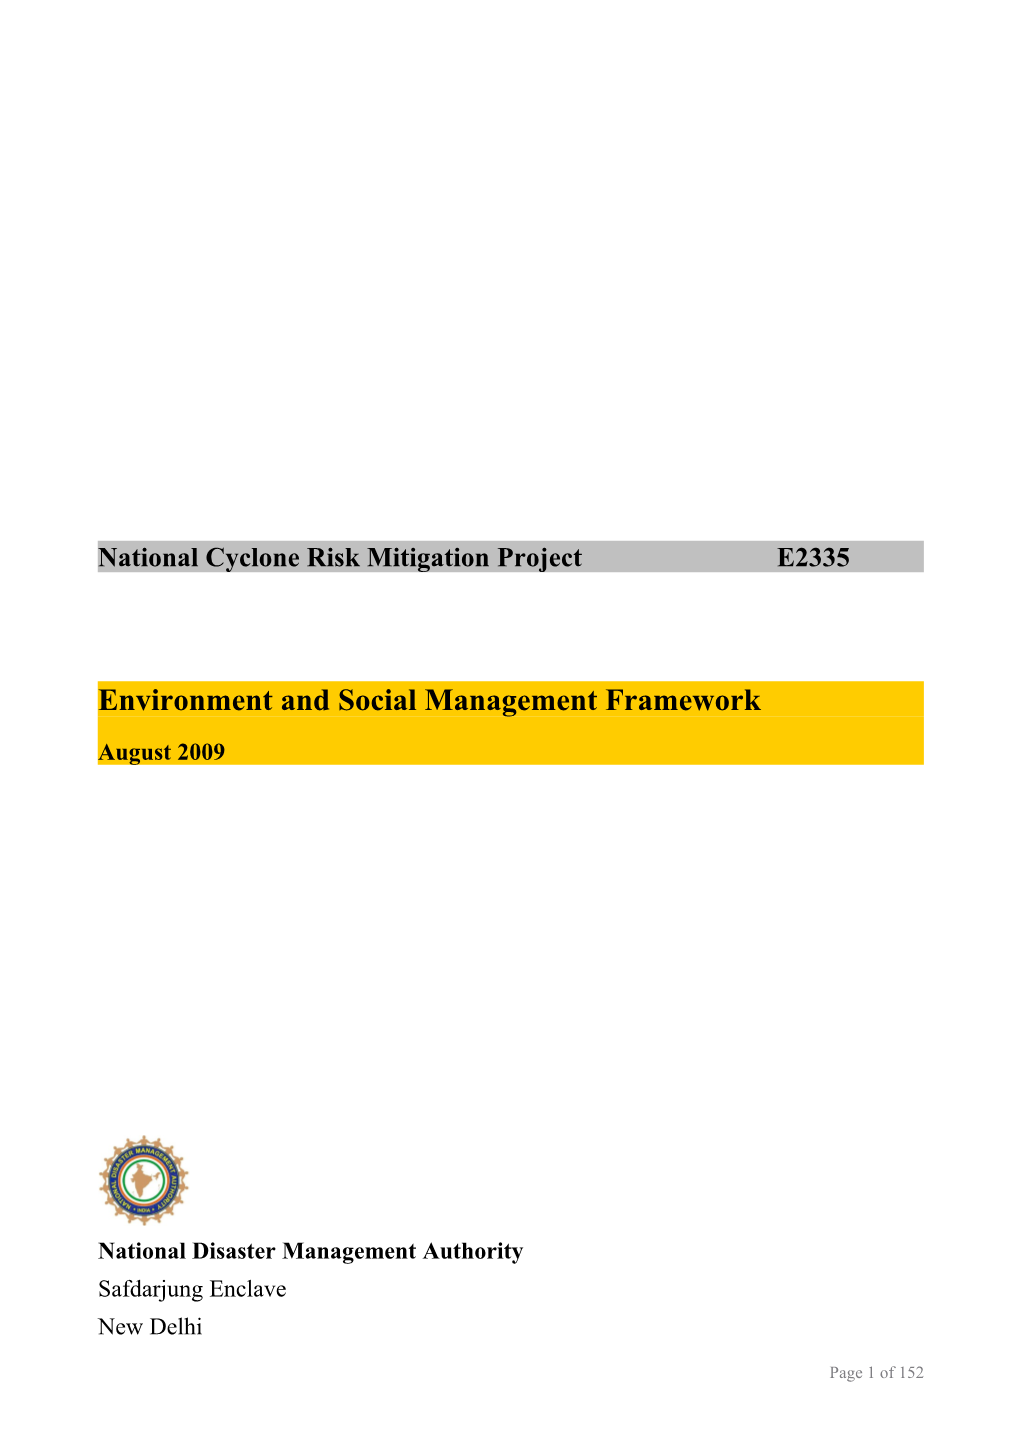 National Cyclone Risk Mitigation Project E2335